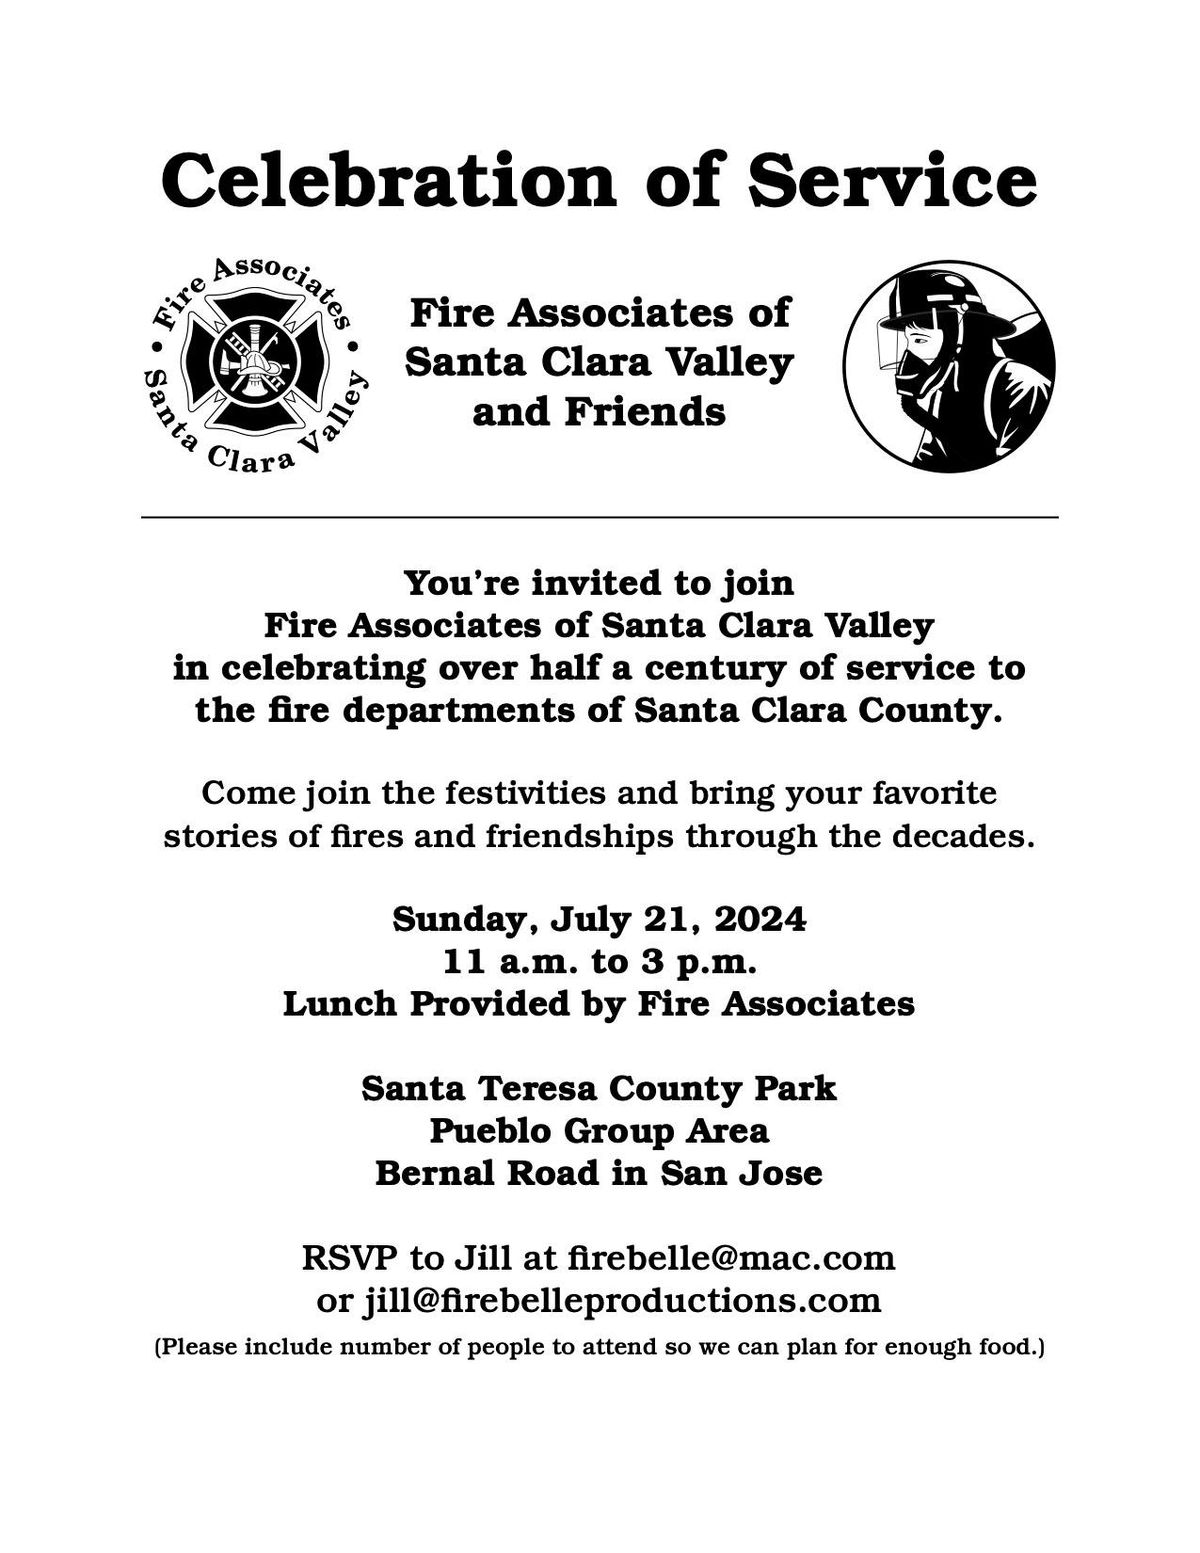 Picnic to celebrate over 50 Years of service to the Fire Departments of Santa Clara County